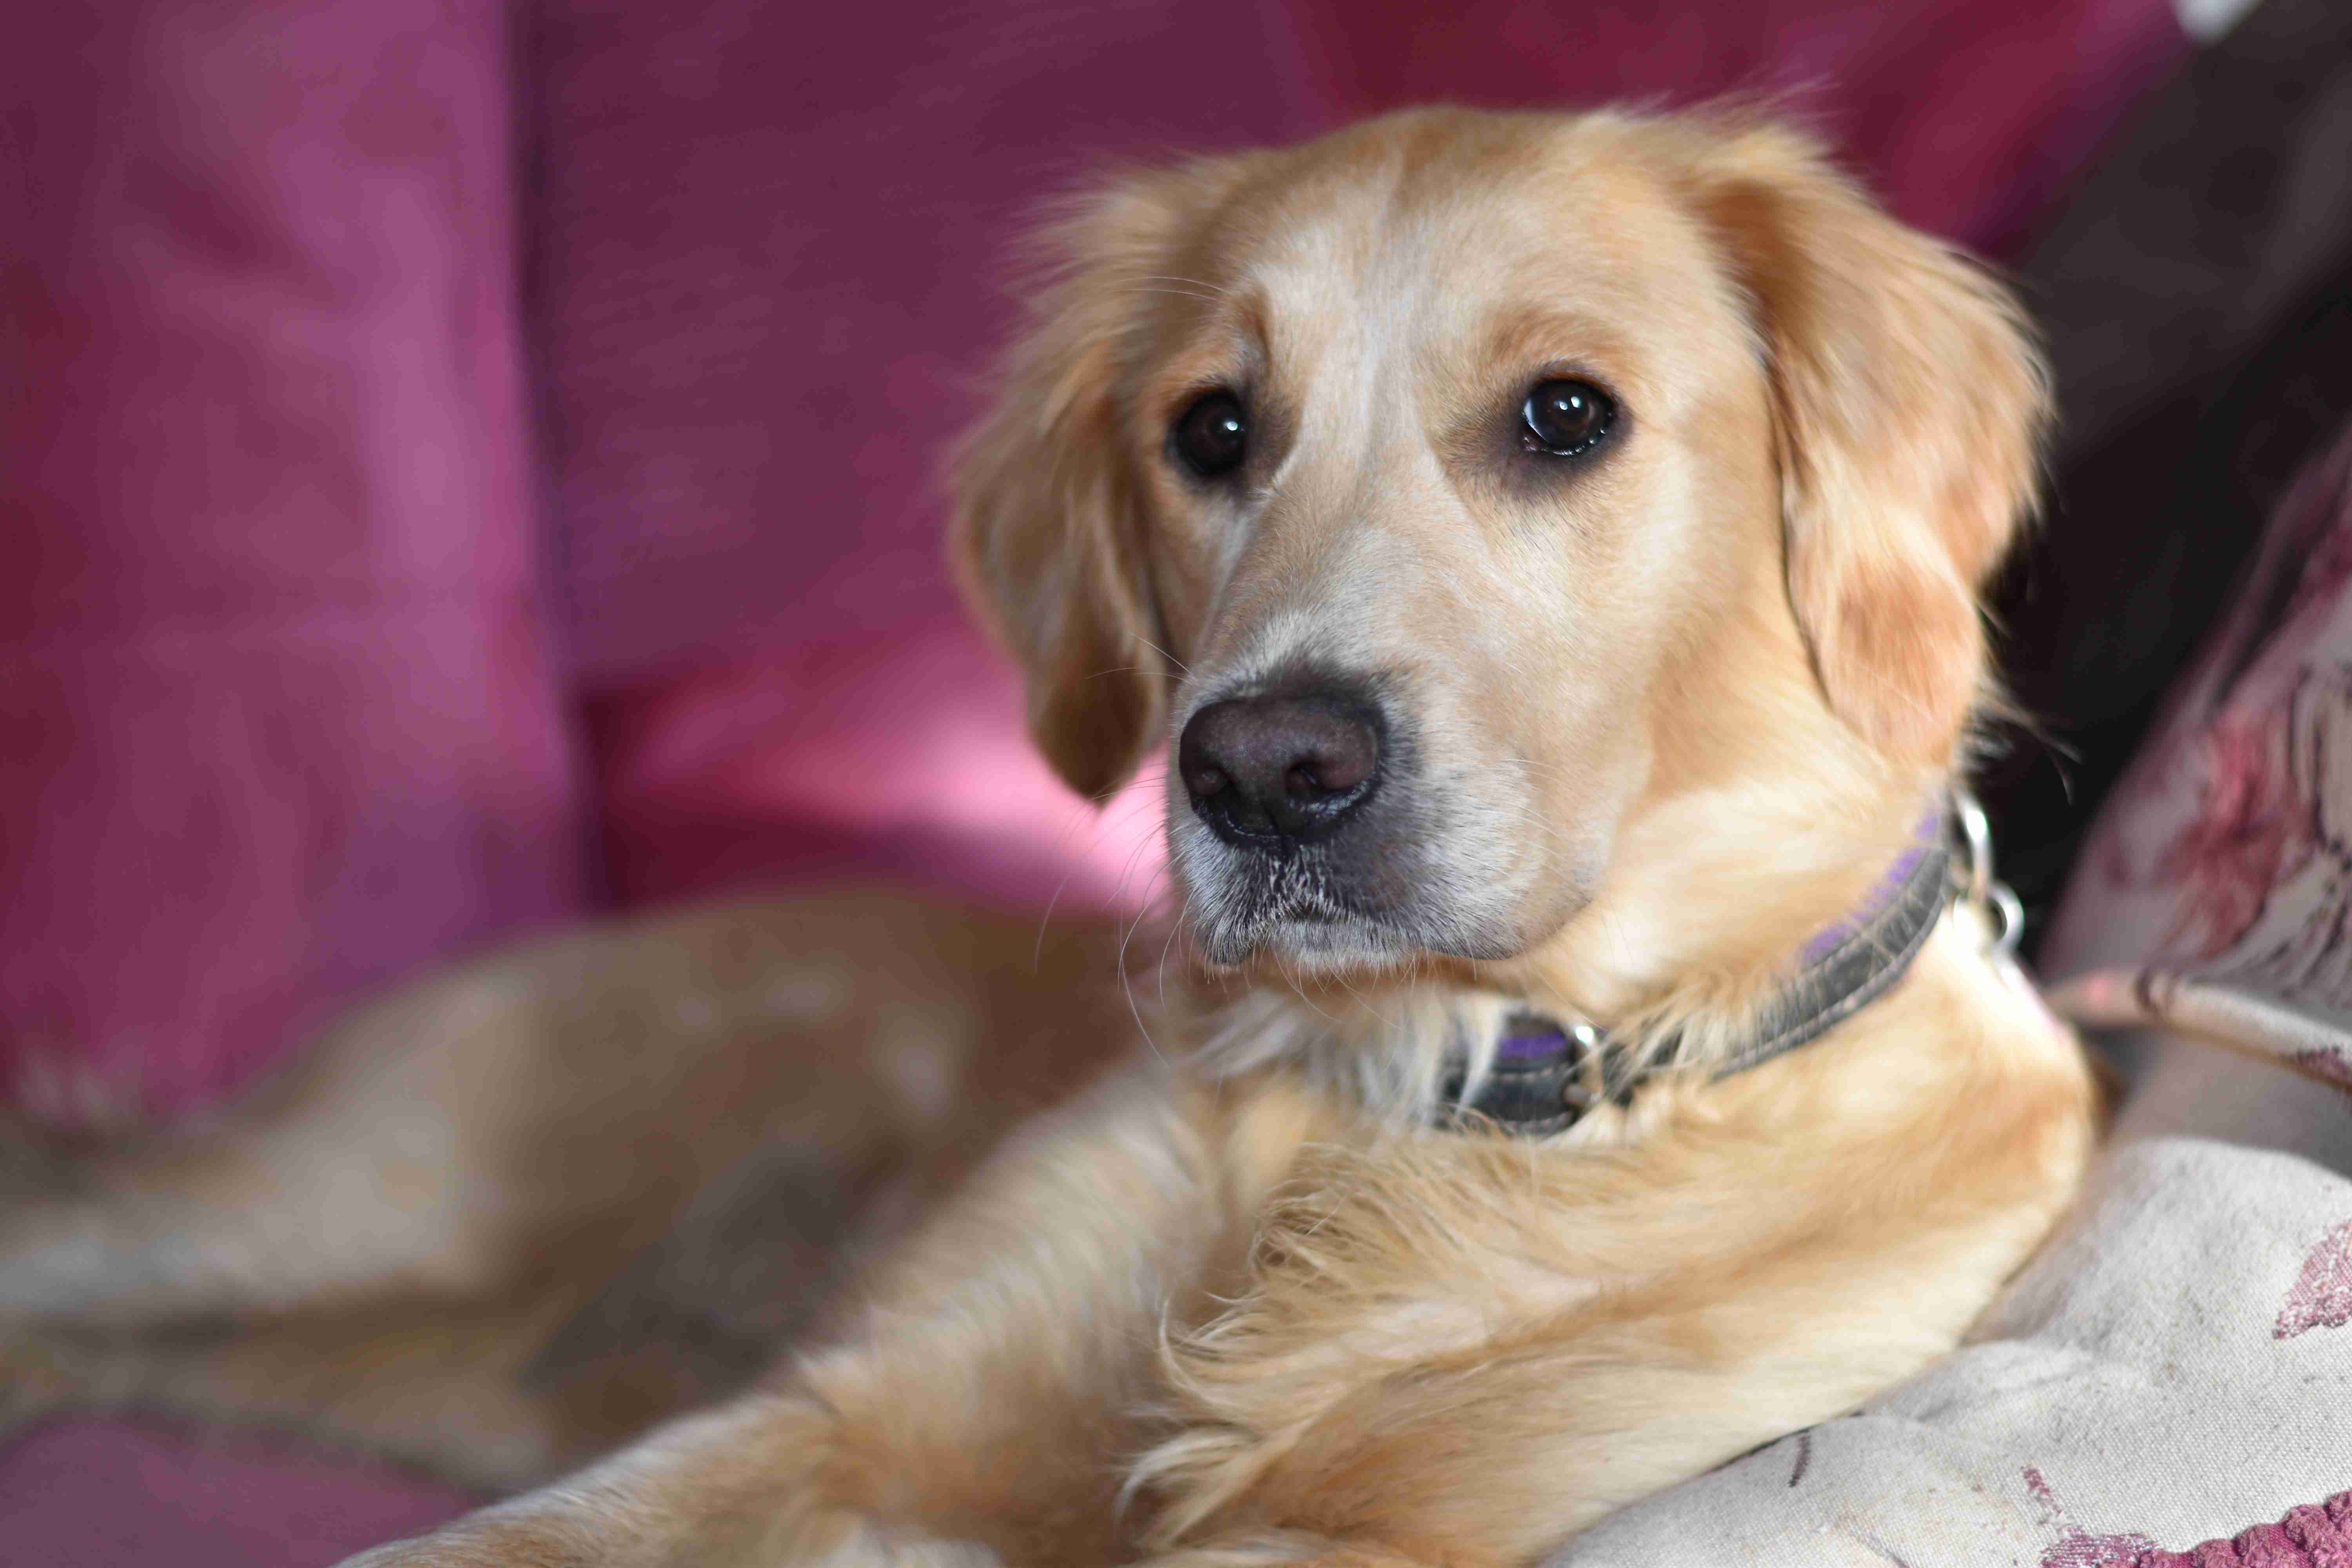 Are Golden Retrievers prone to any dental issues?